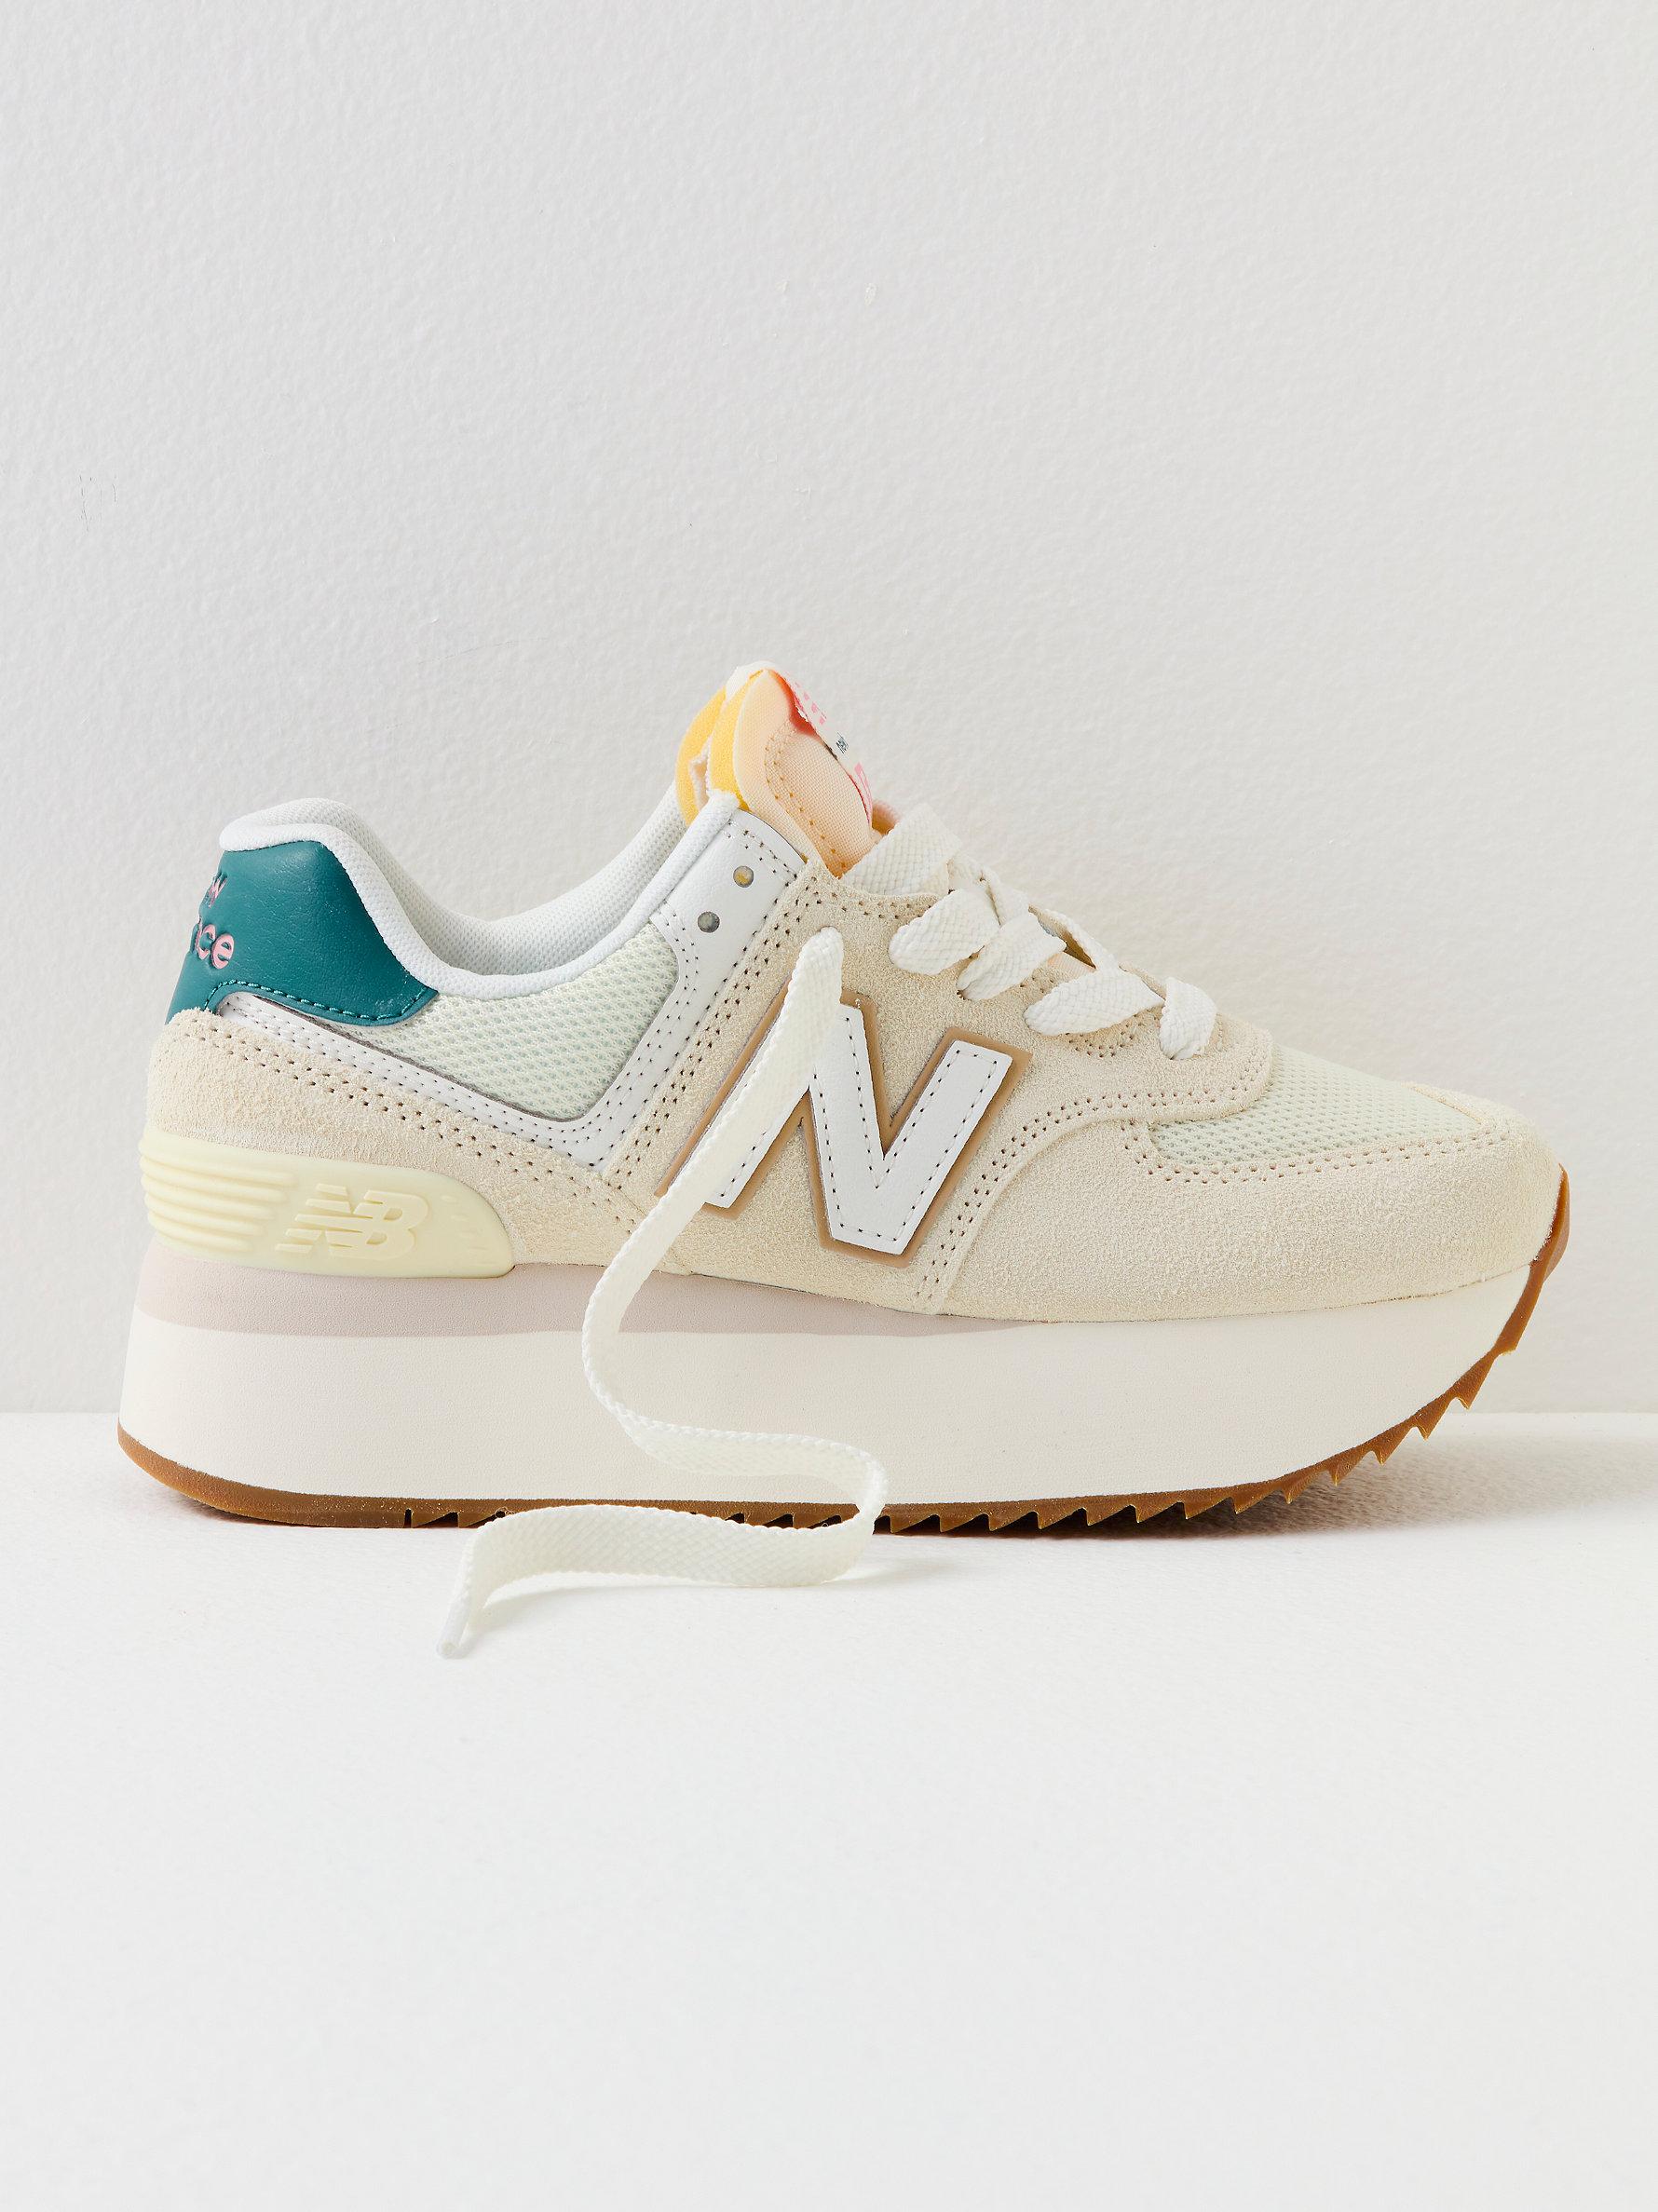 Free People New Balance 574+ Sneakers in Natural | Lyst